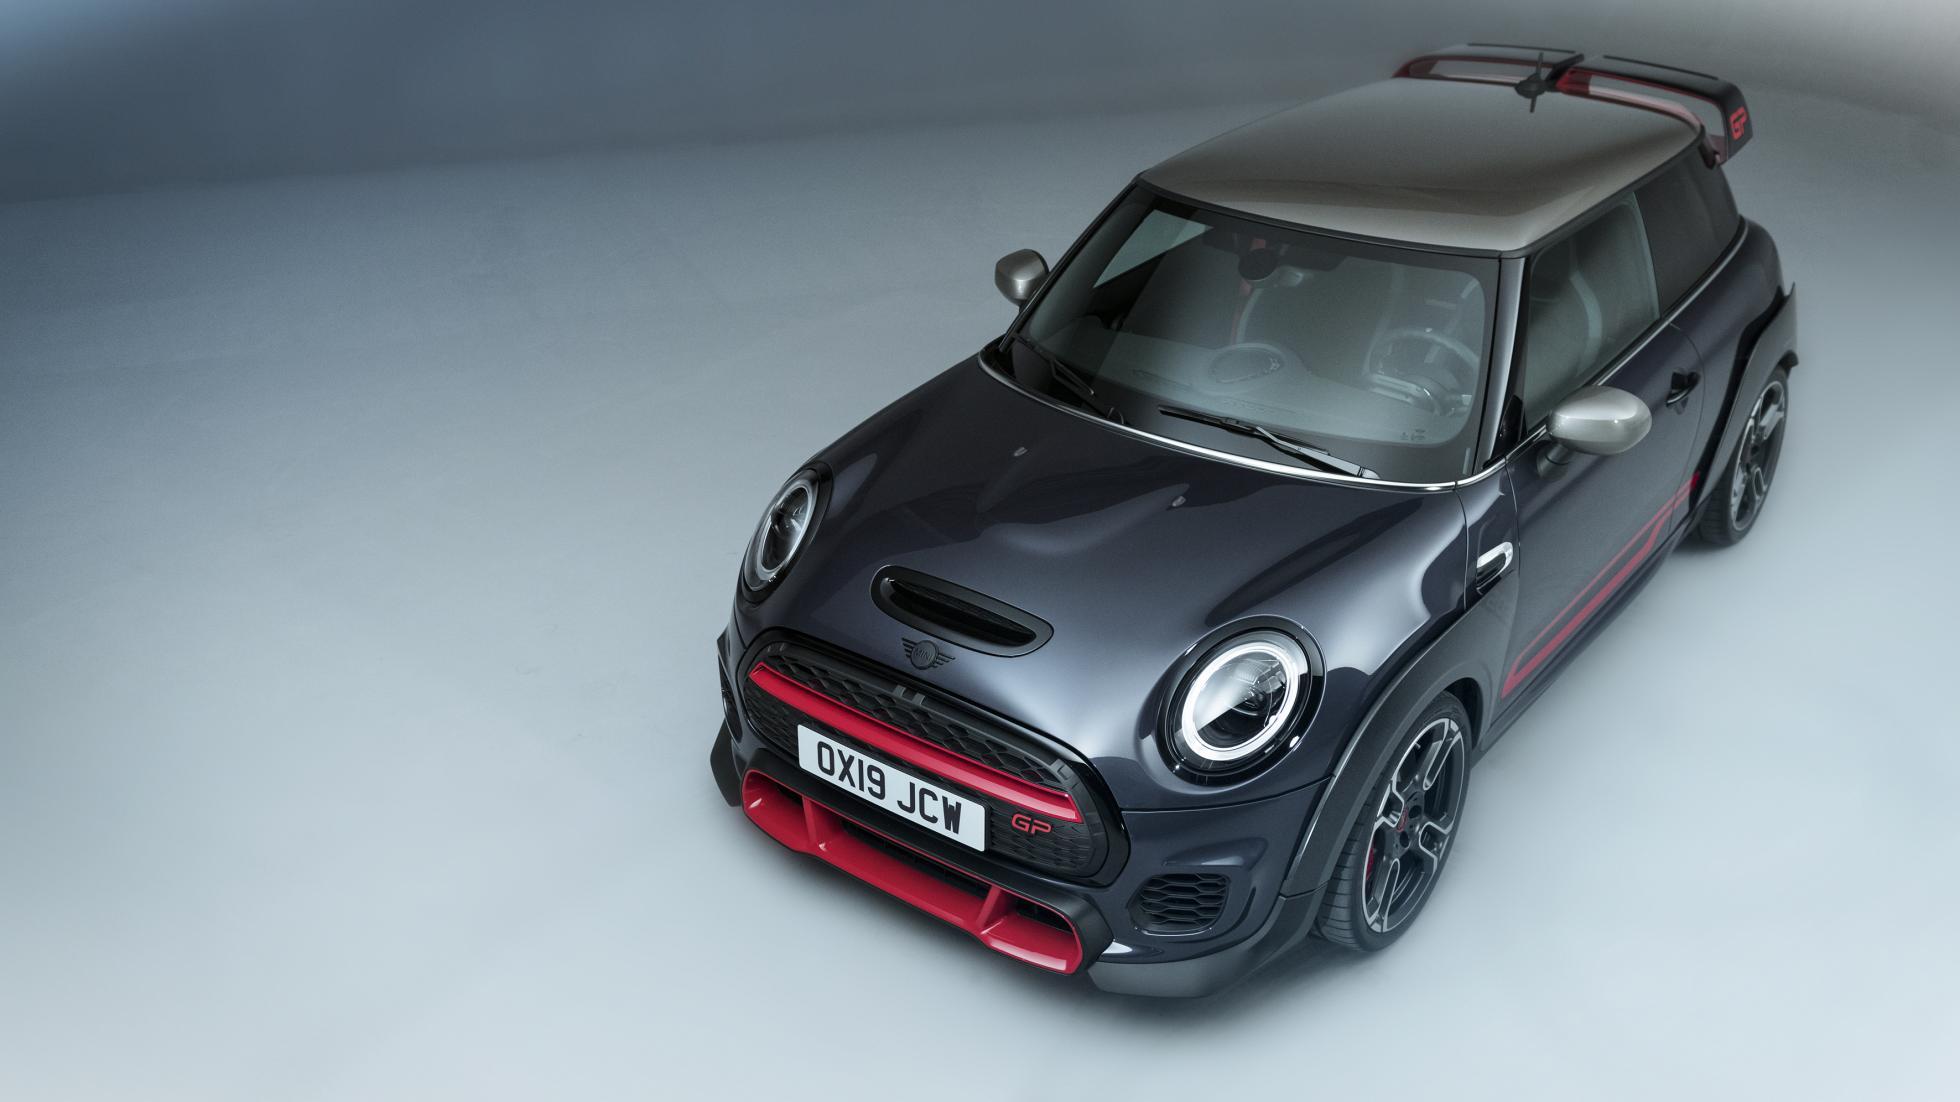 The new Mini GP looks as wild as we hoped it would